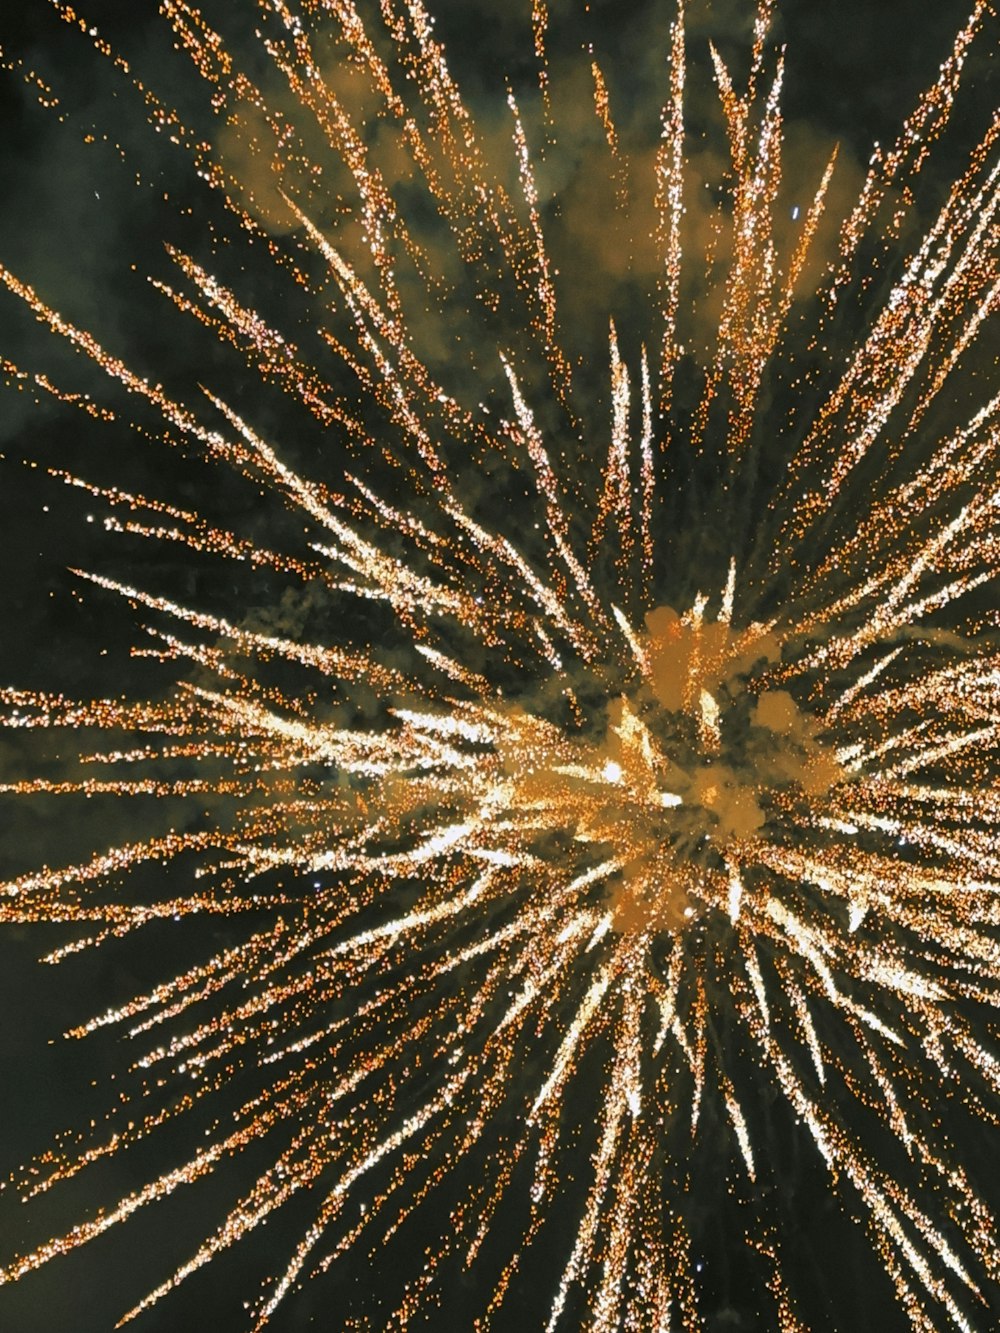 a large fireworks display in the night sky